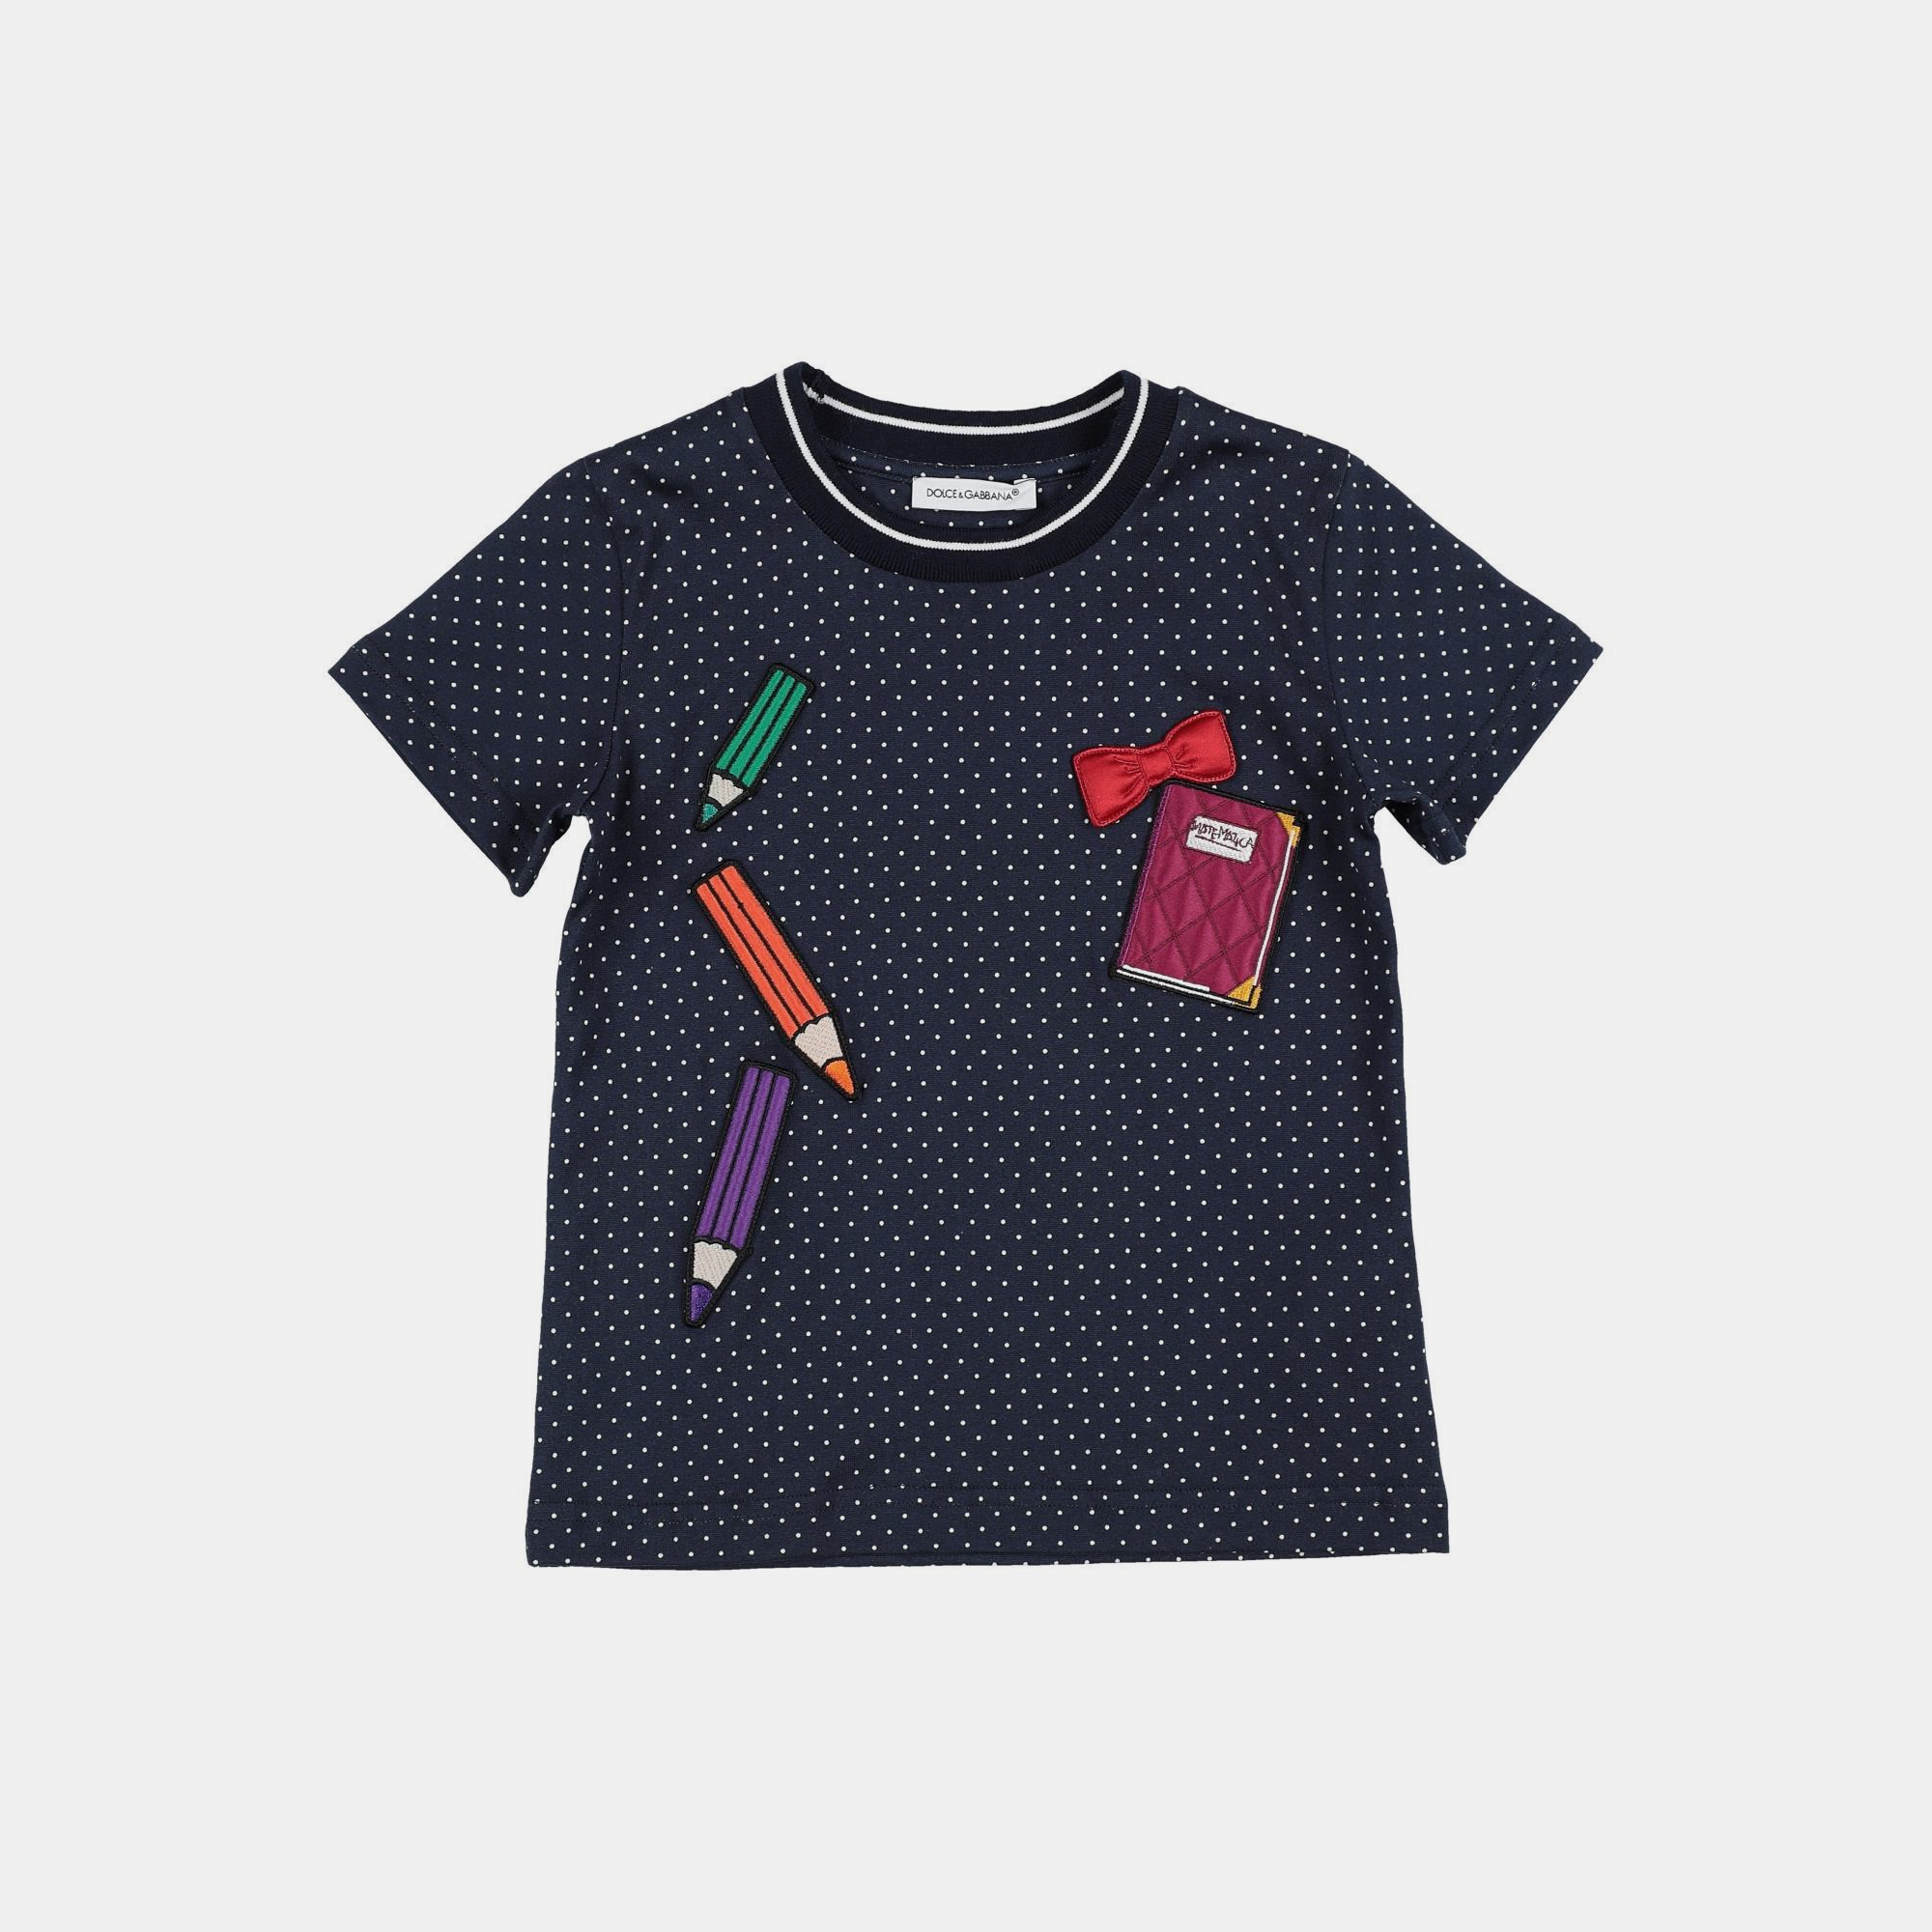 Dolce & gabbana navy blue dotted cotton t-shirt size 5y